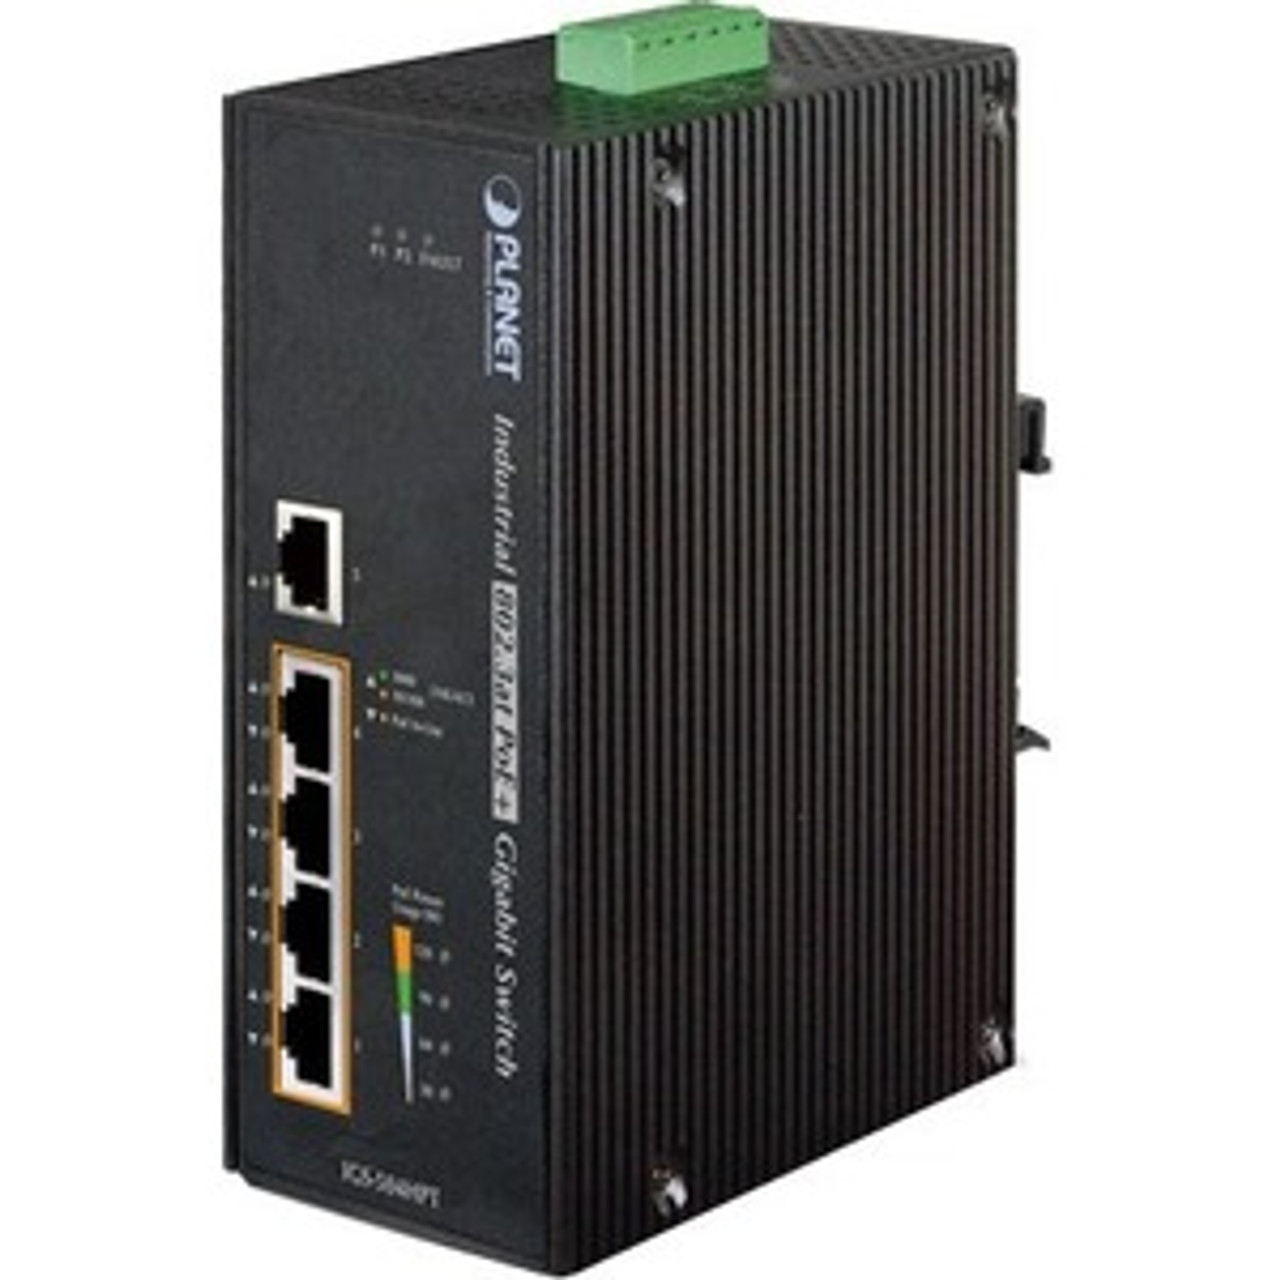 IGS-504HPT Planet Technology IP30 5-Port Gigabit Switch with 4-Port 802.3AT POE+ (Refurbished)